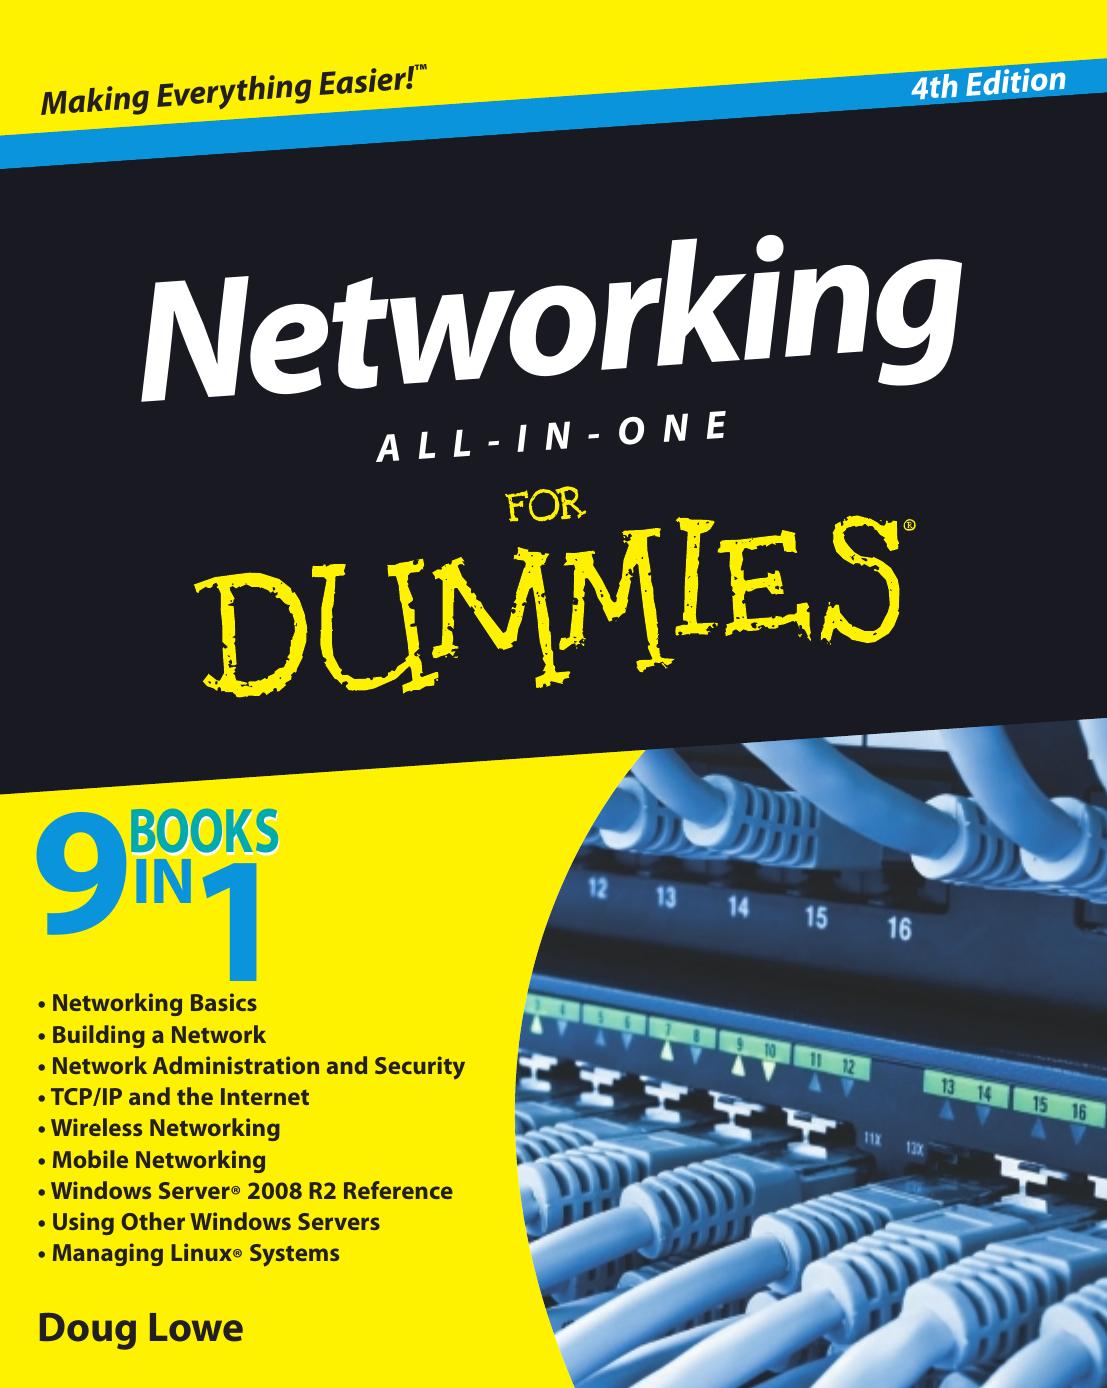 Networking All-in-One For Dummies by Doug Lowe